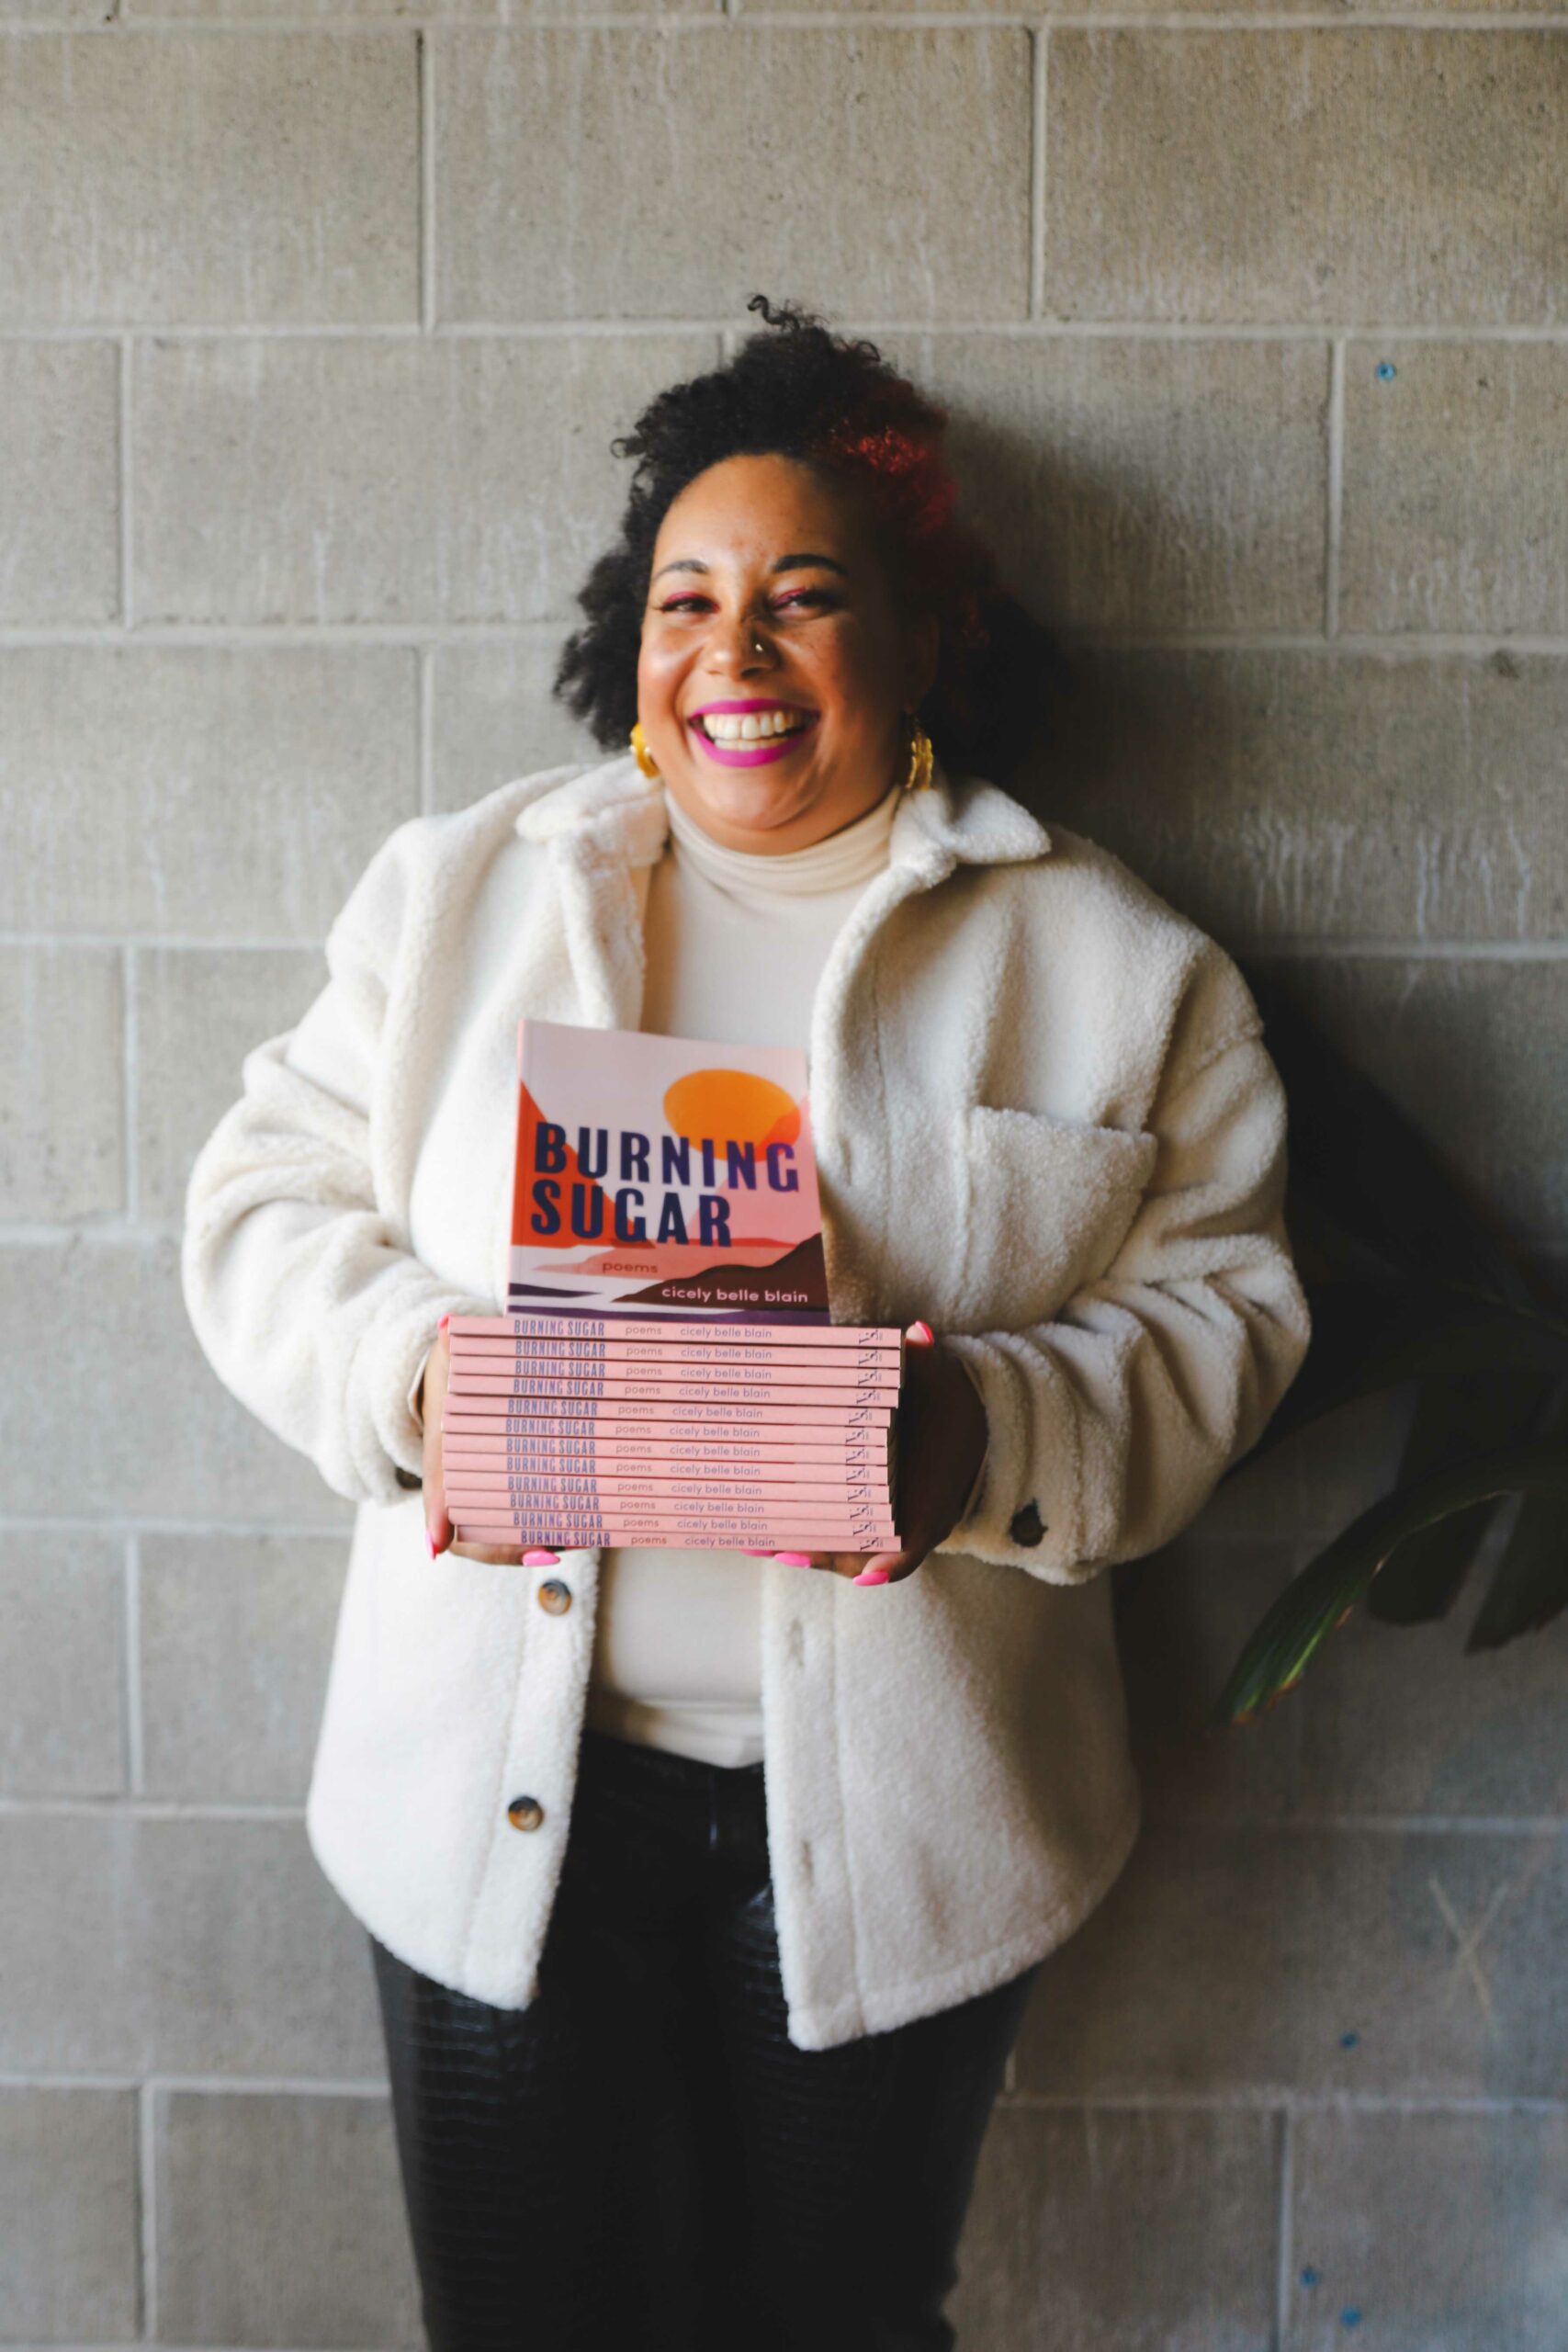 Cicely Belle Blain is photographed with a stack of their book of poetry, Burning Sugar, and smiling widely in front of a brick wall and wearing a white jacket and turtleneck with gold earrings and mid-length curly haired half tied up.